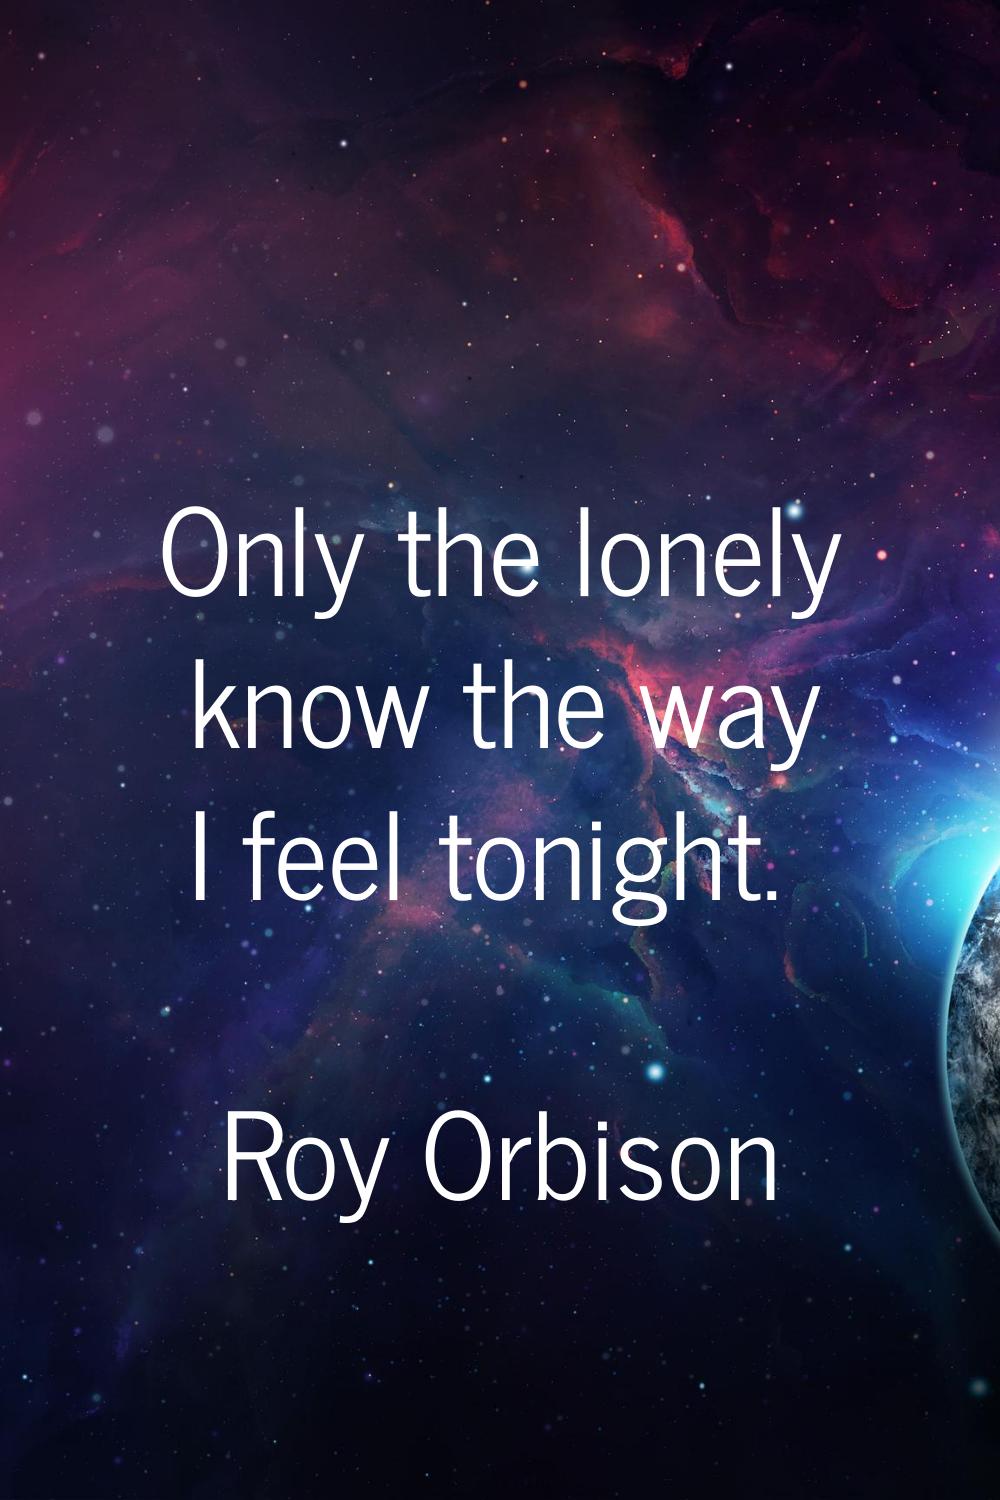 Only the lonely know the way I feel tonight.